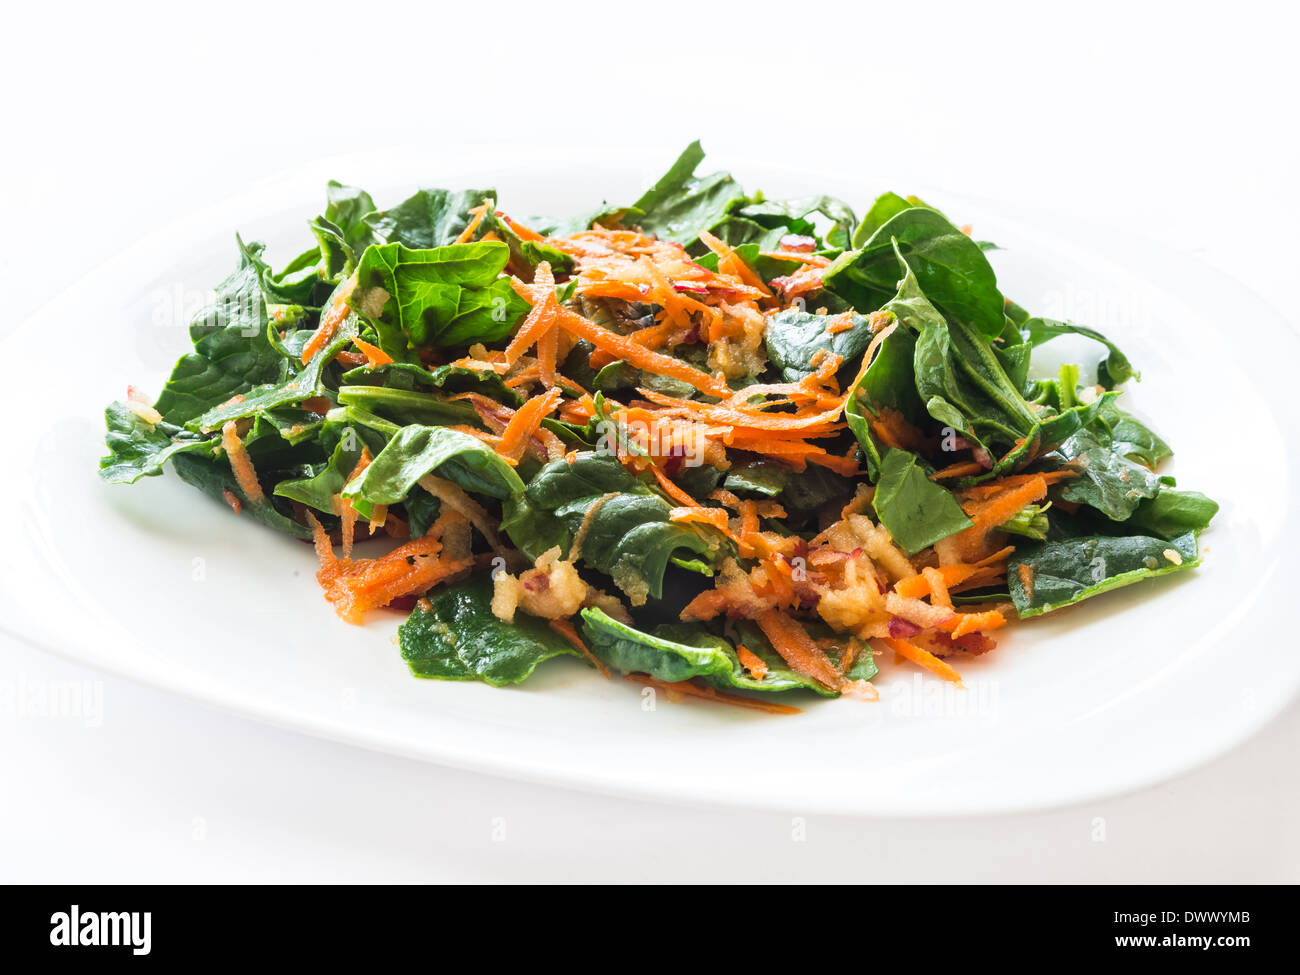 Mix vegetables salad with carrot, spinach and apple Stock Photo